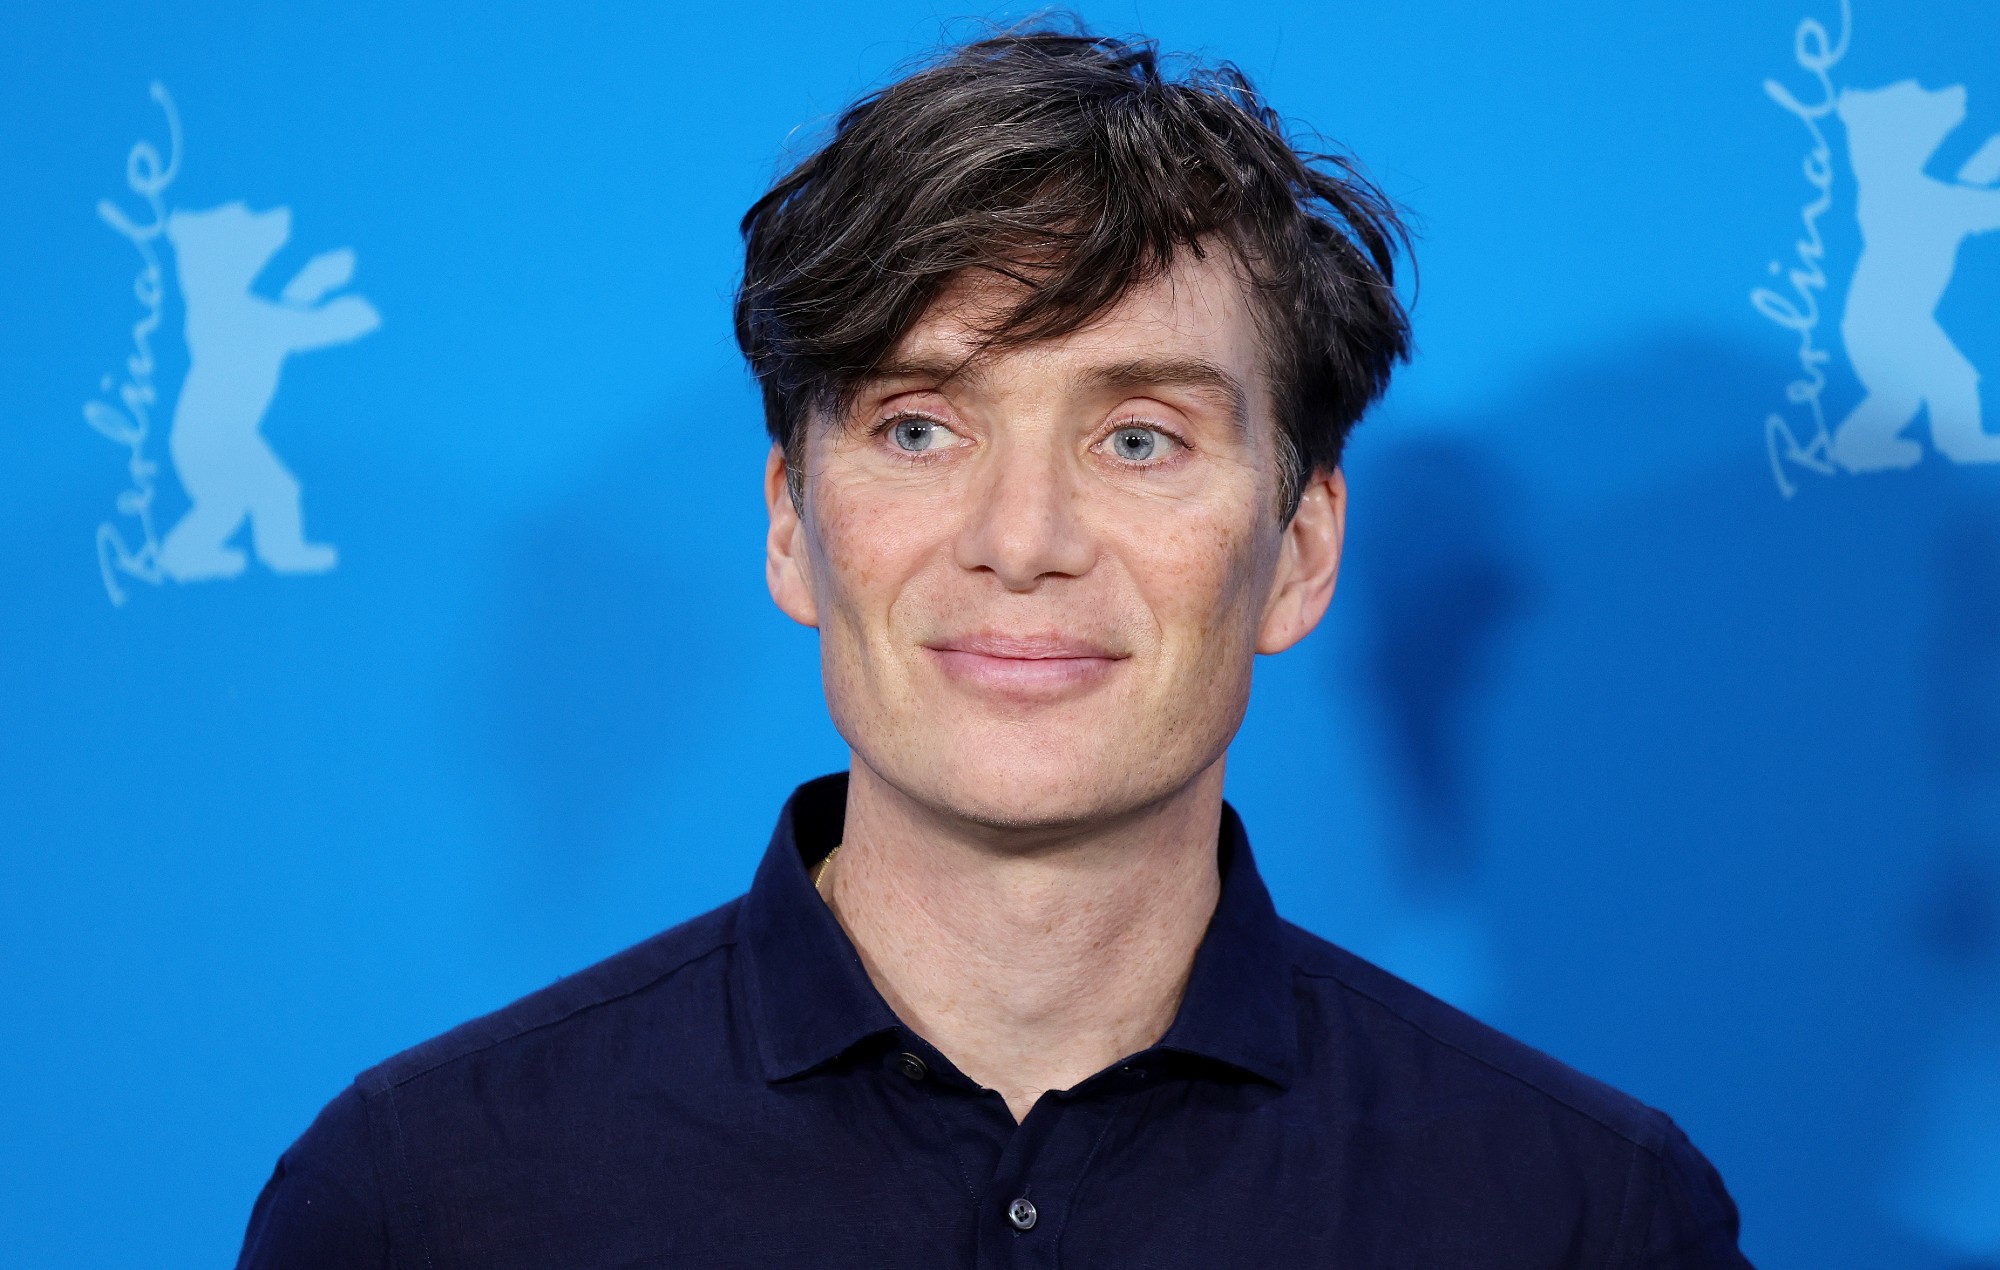 Watch 19-year-old Cillian Murphy discuss his jazz band and the importance of live music